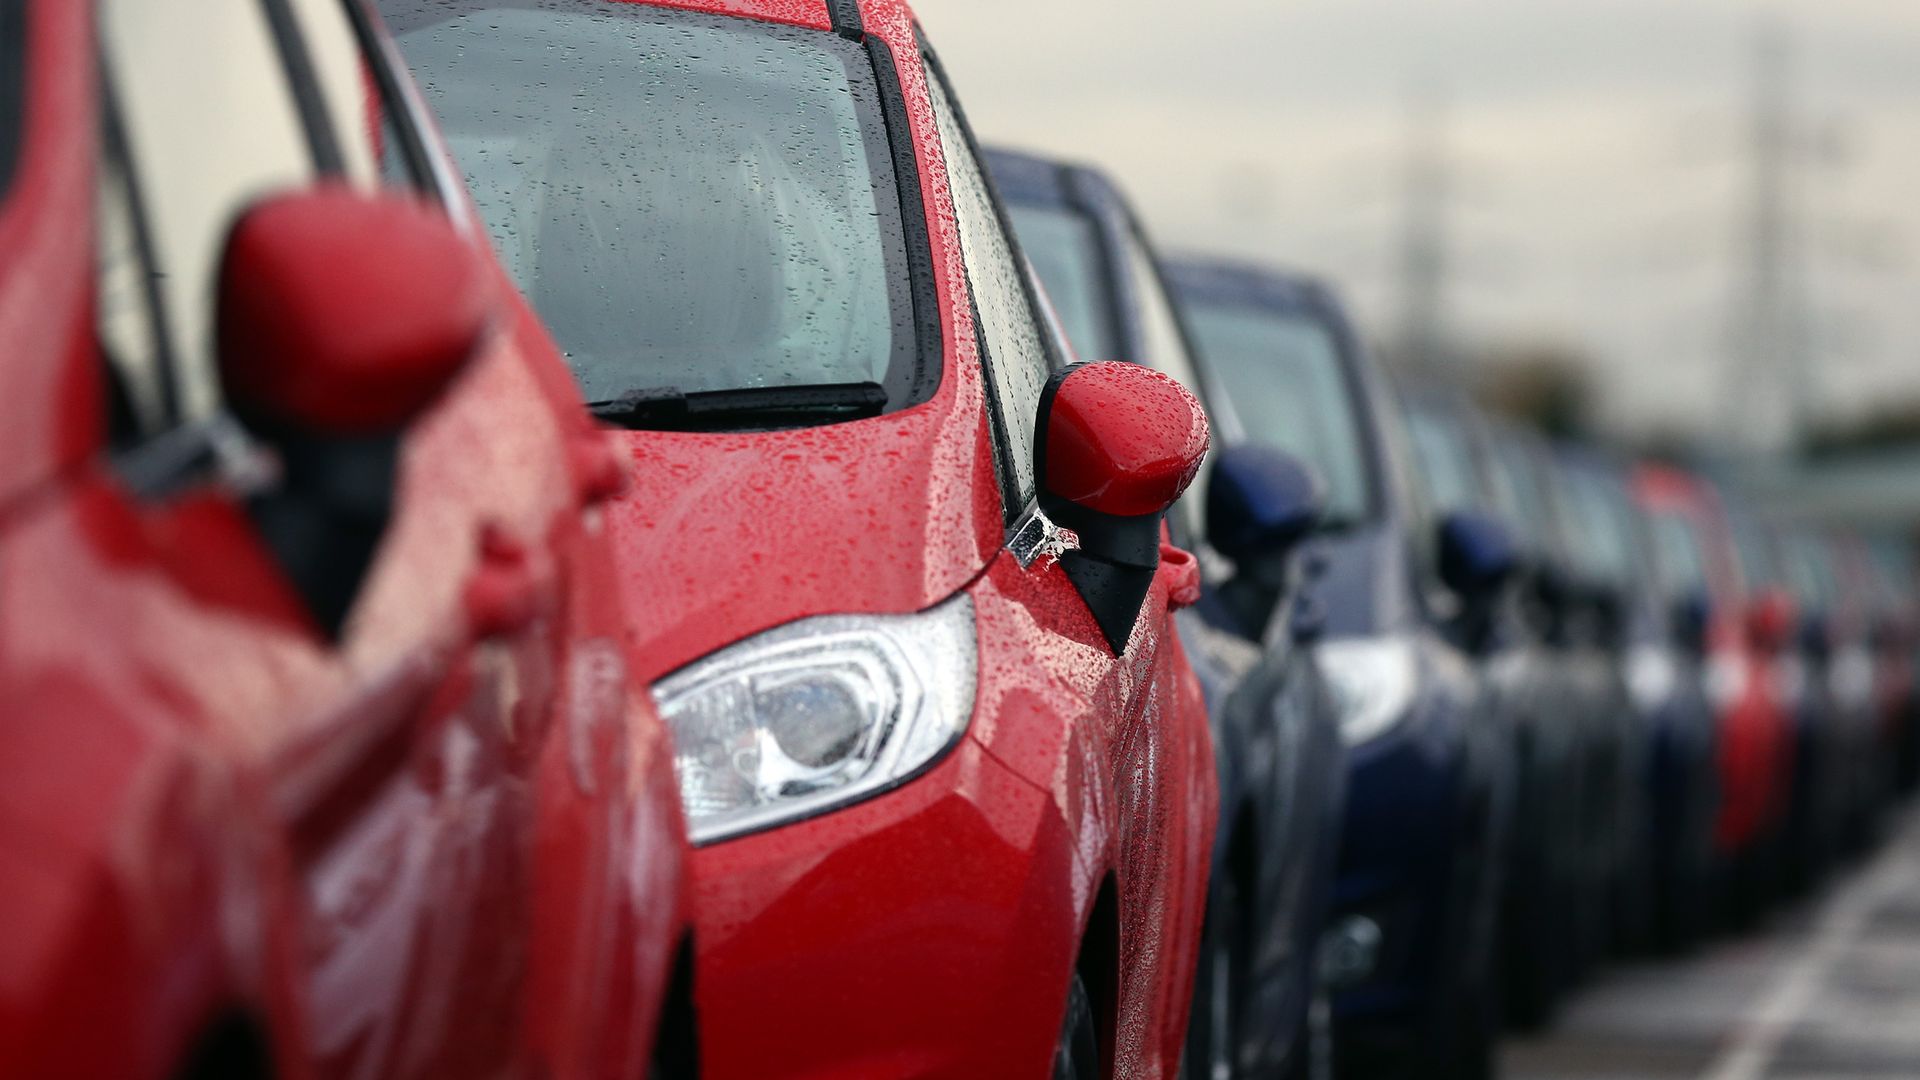 Cars lined up at a dealership